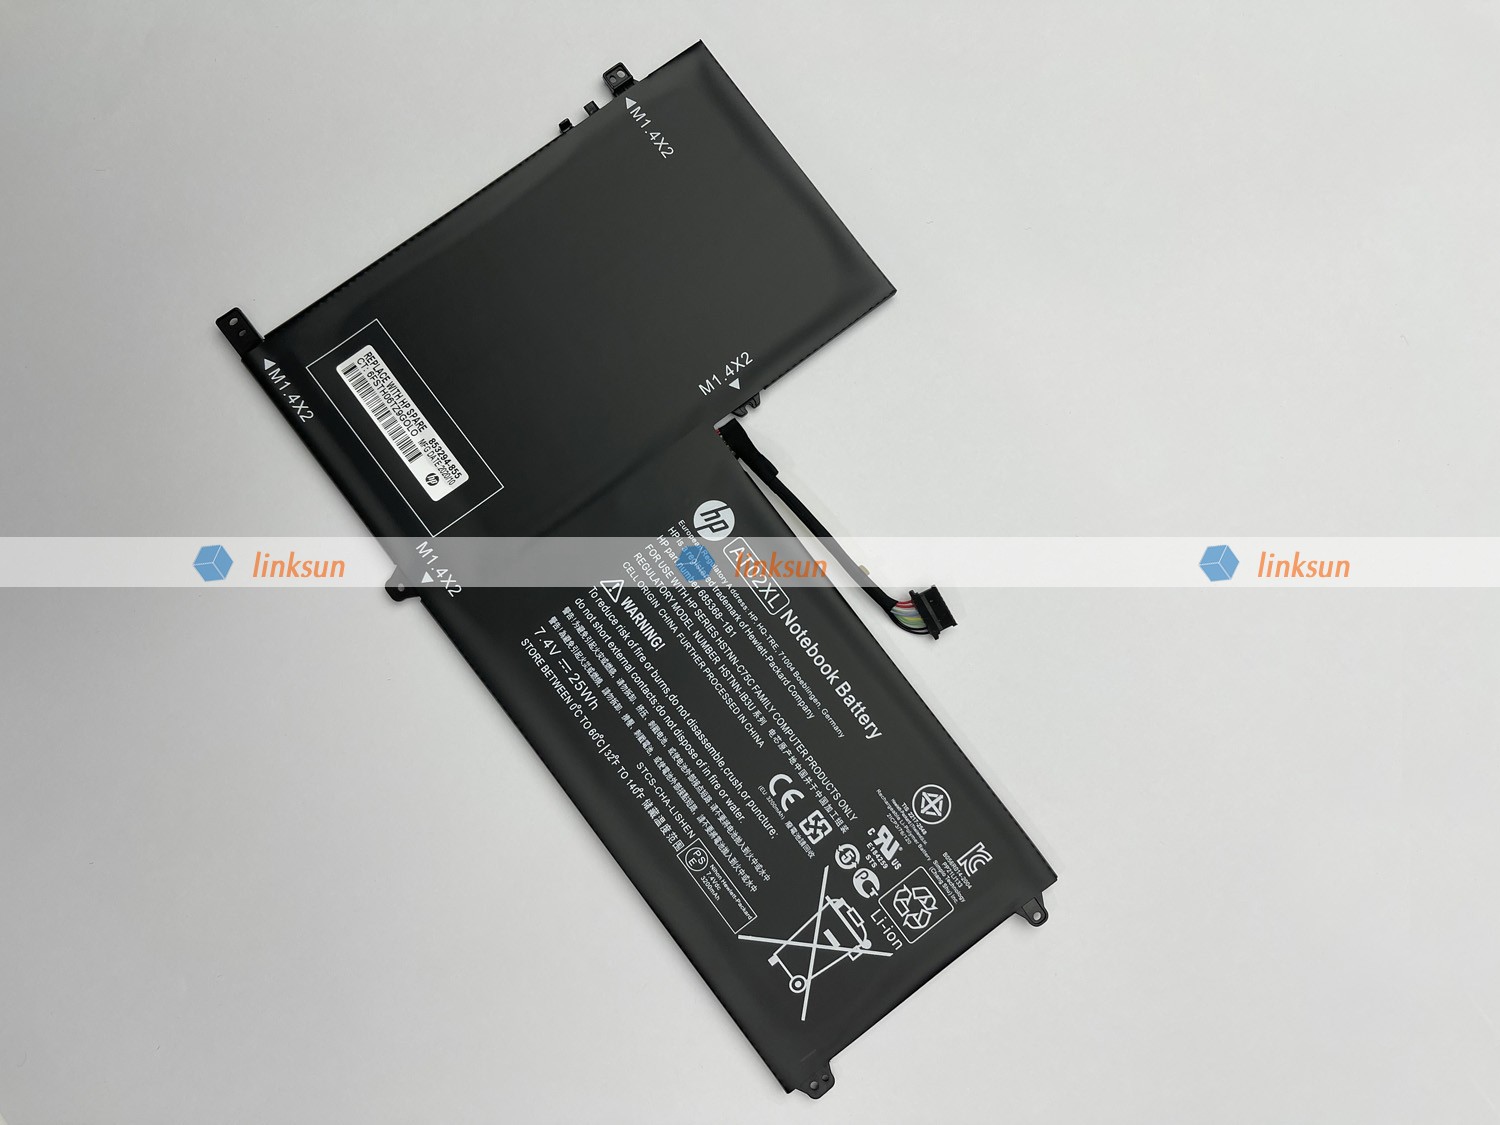 HP AT02XL battery inclined